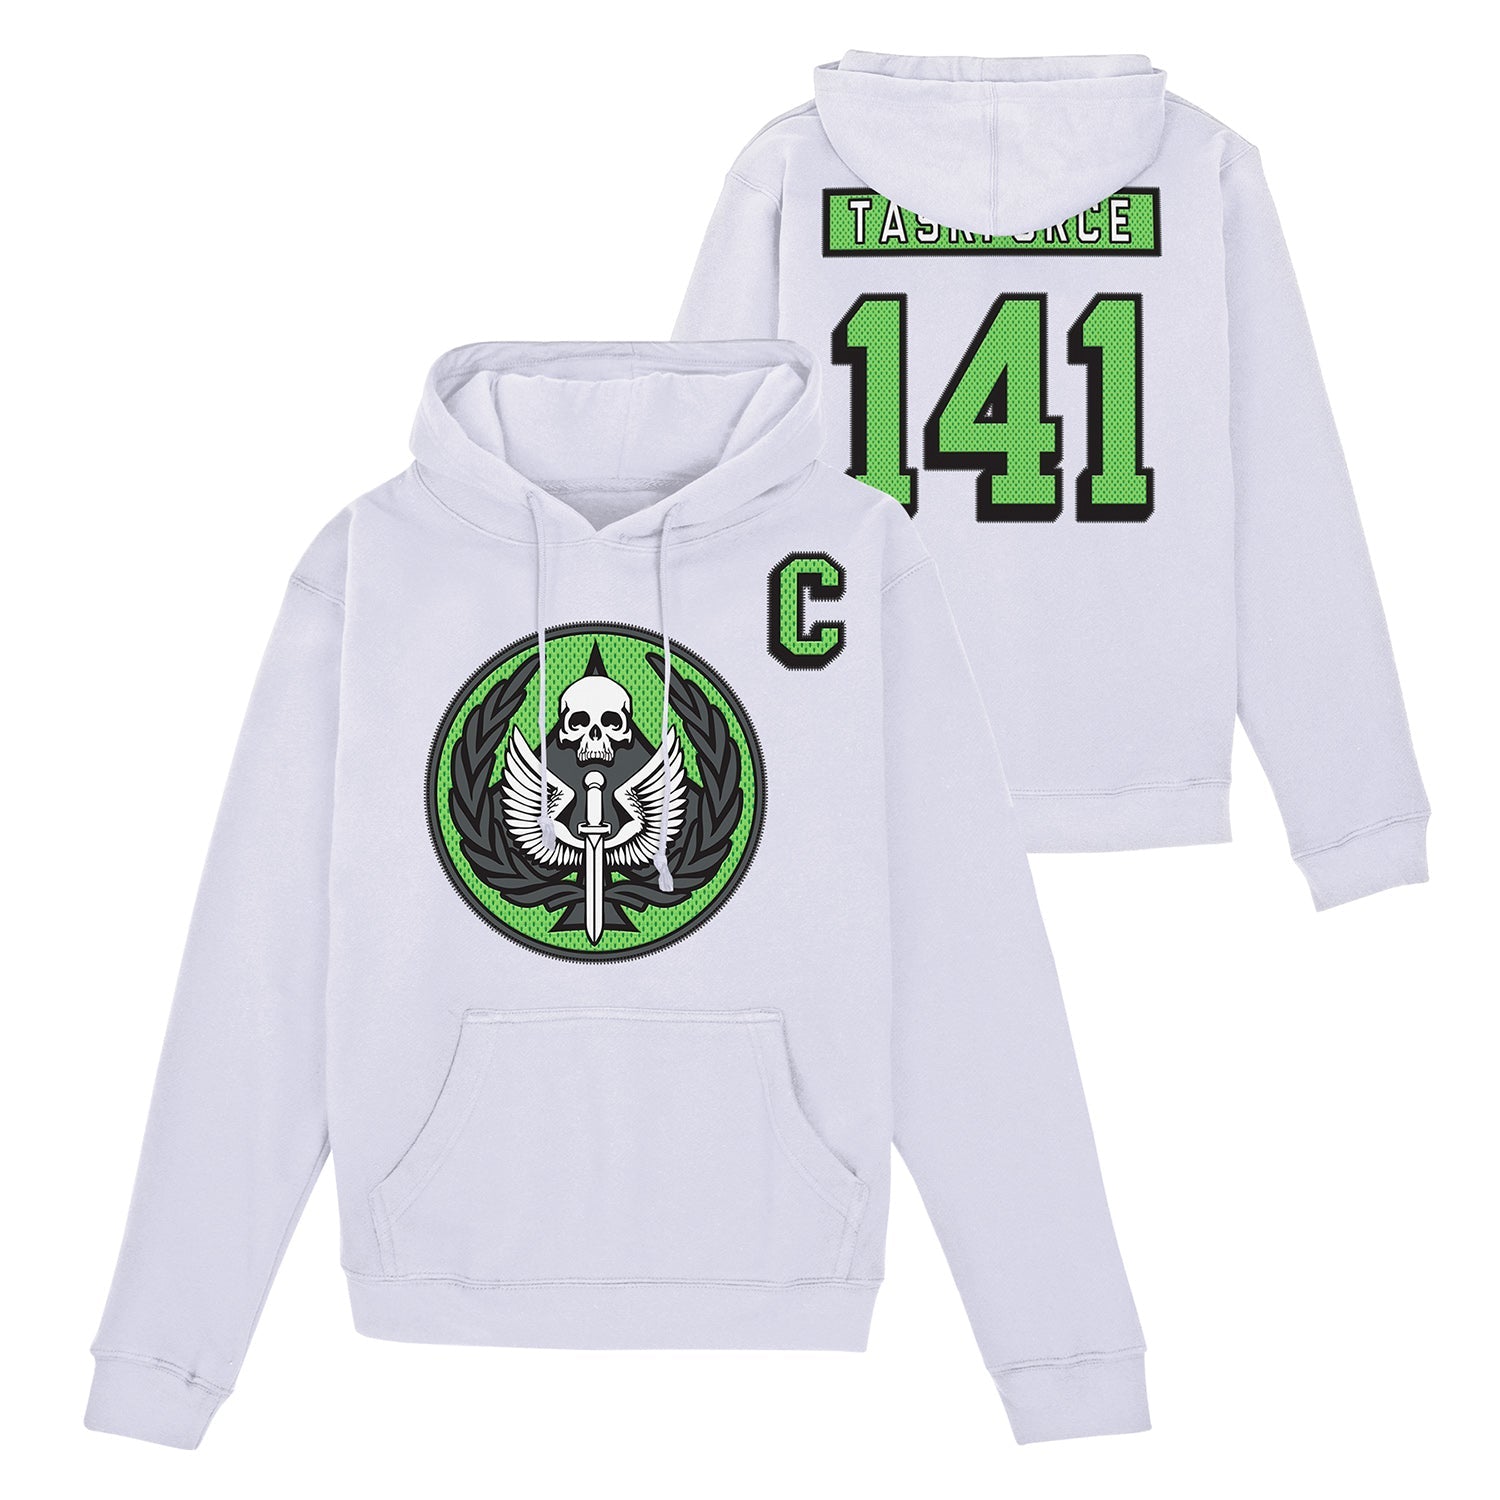 Call of Duty White Hockey Taskforce Hoodie - Front and Back View